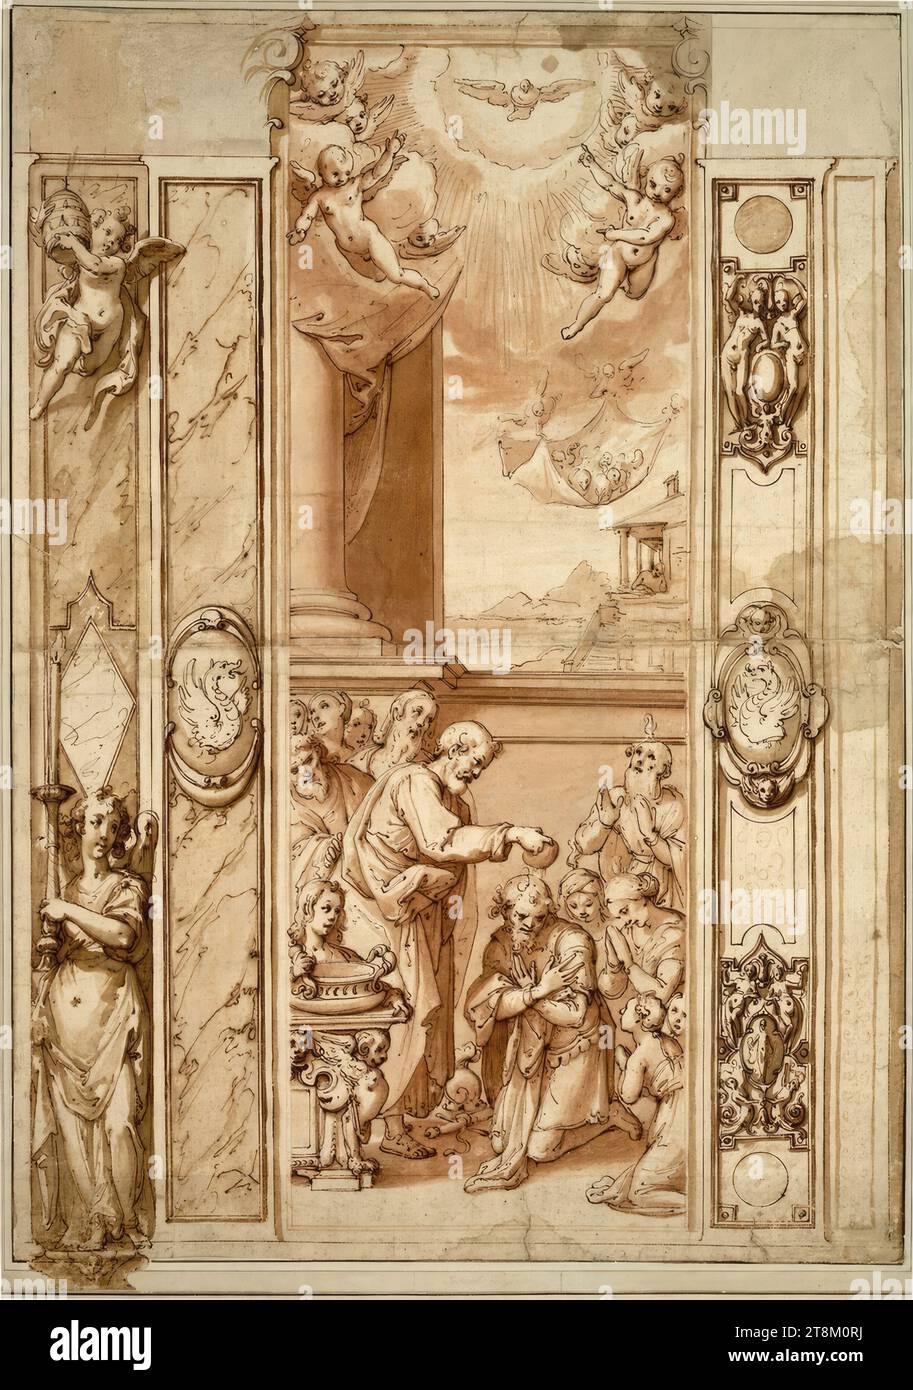 Wall decoration with the baptism of Captain Cornelius; above the vision of the unclean animals, Federico Zuccari (Sant' Angelo in Vado 1540/41 - 1609 Ancona), drawing, chalk; Feather; the composition reddish brown, the architecture washed brown; the space for the capital cut out at the top right; Horizontal crease, 53.8 x 33.6 cm, l.l. Duke Albert of Saxe-Teschen, lower right of center in pencil (cut off) '... Da Pesaro'; on the lower left, the base of the statue extends beyond the paper limit Stock Photo